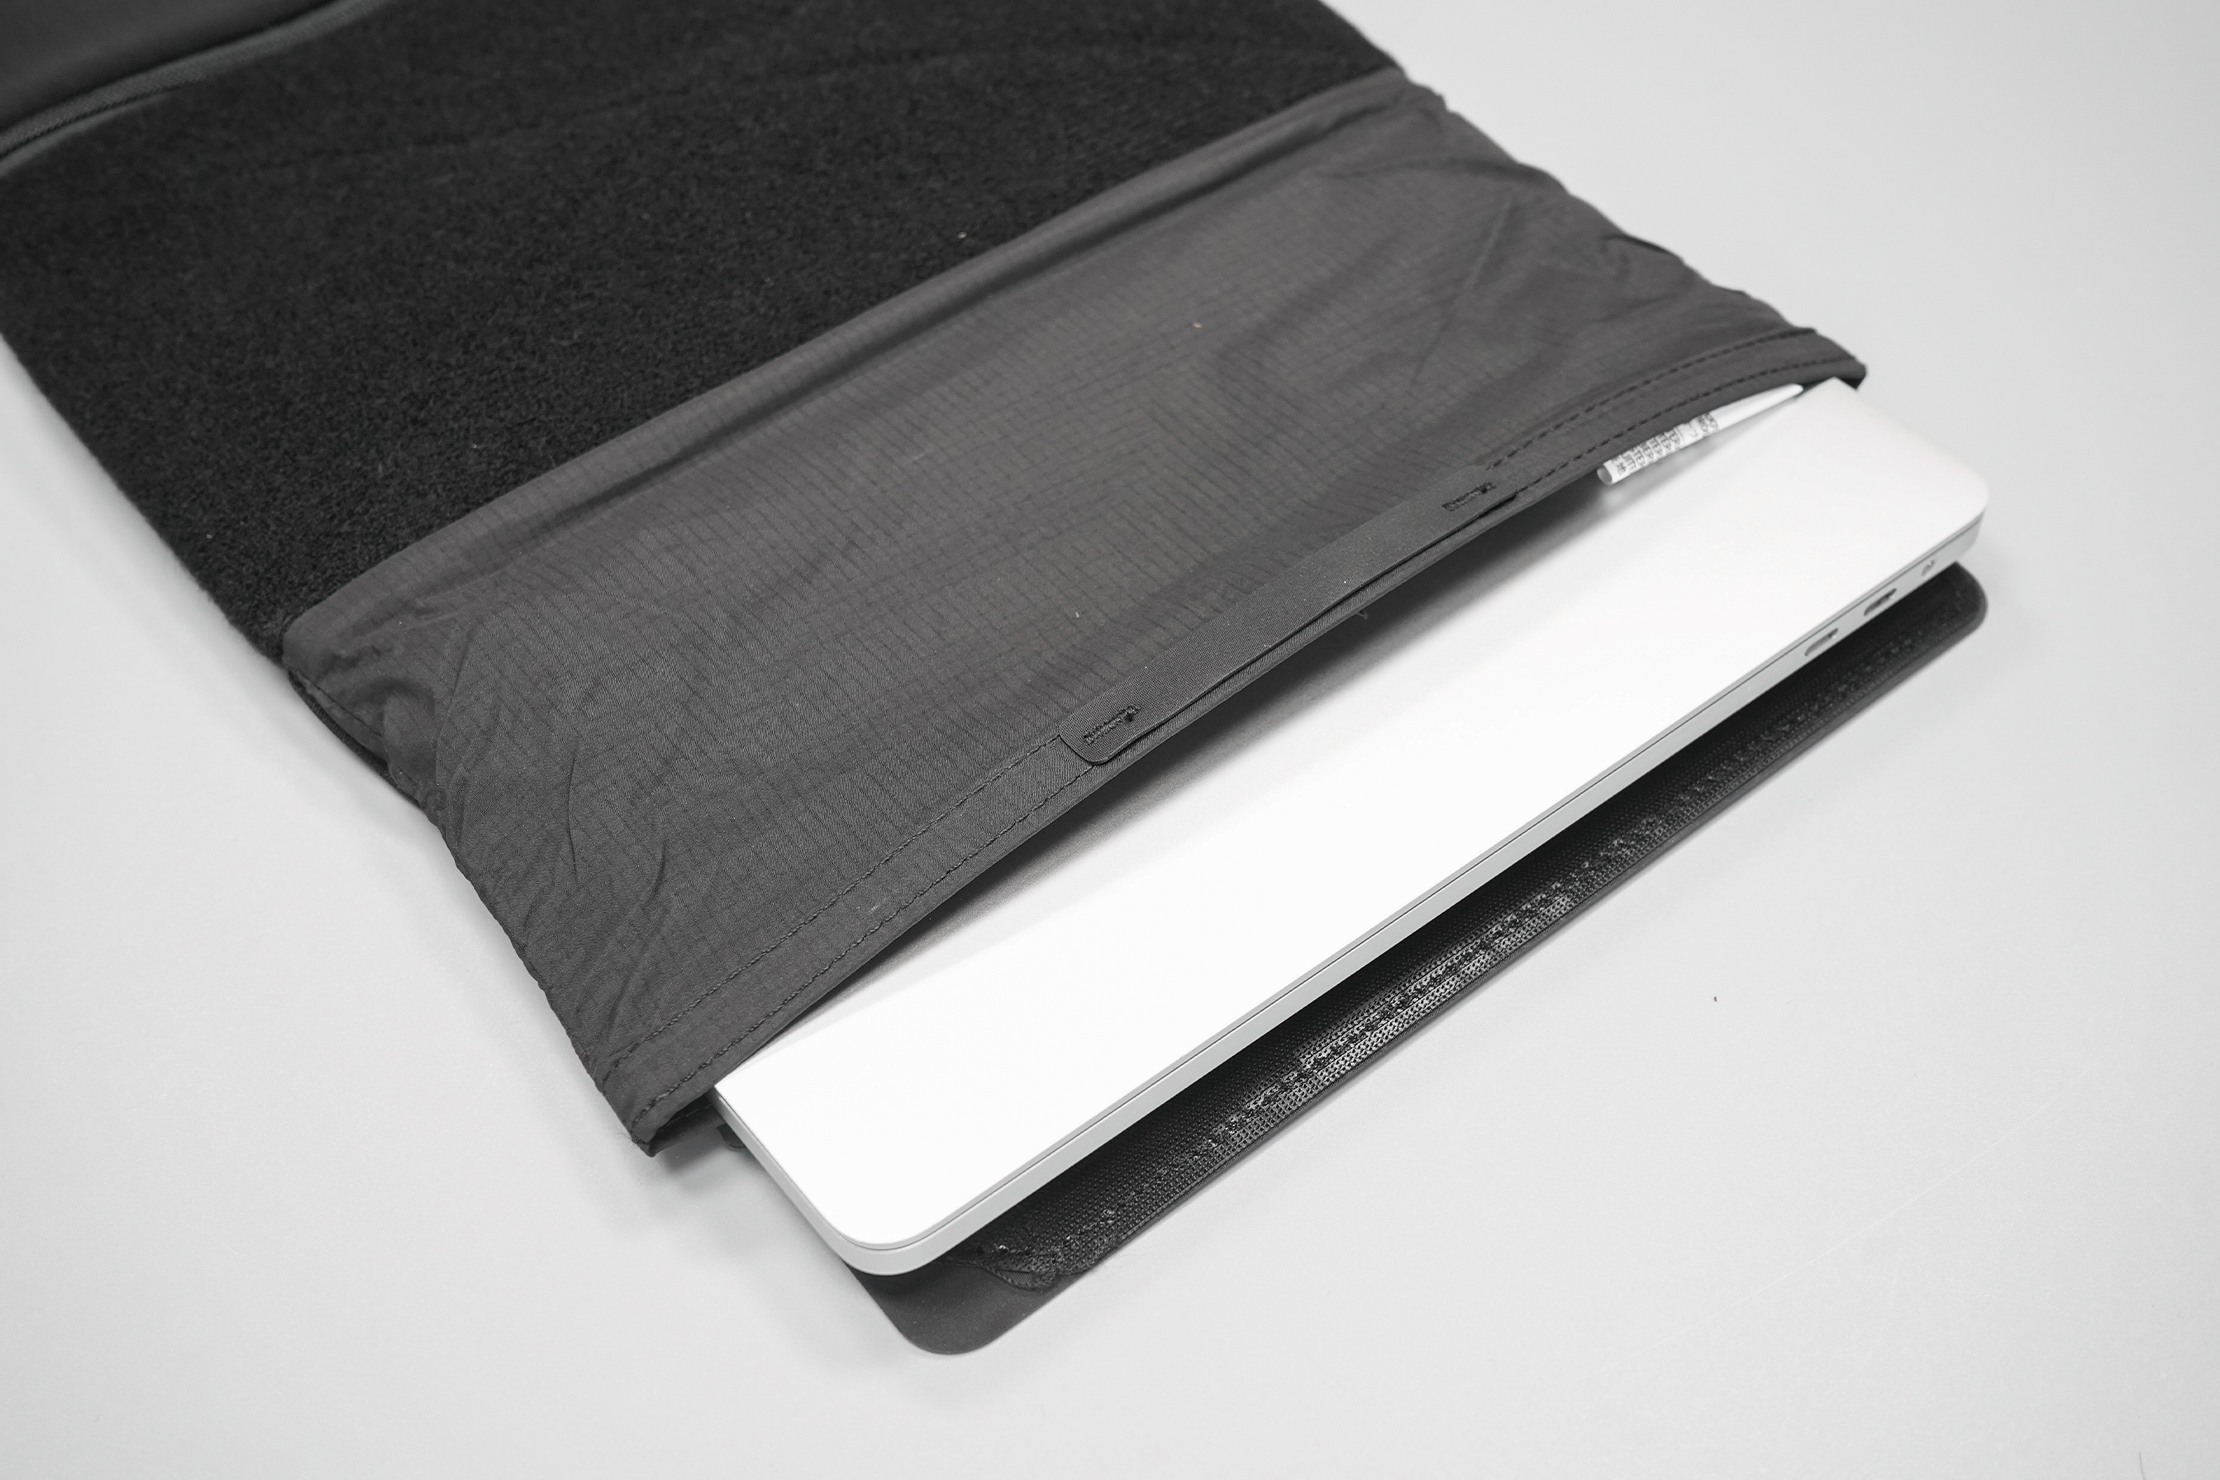 Matador Laptop Base Layer | Taking out our laptop from the rolltop.